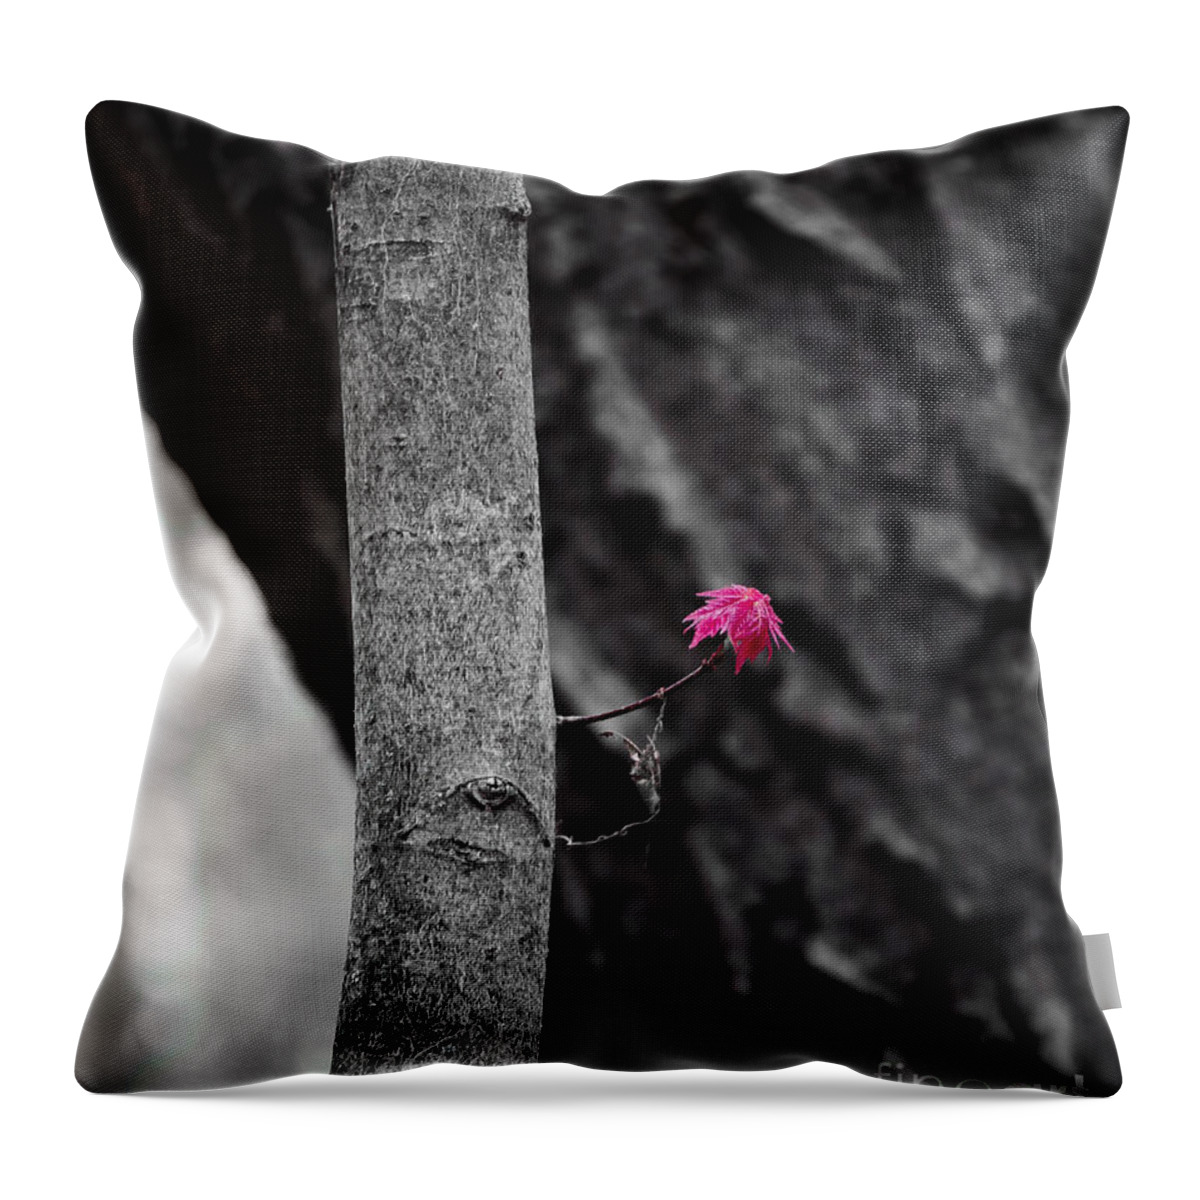 Natural Bridge Throw Pillow featuring the photograph Spring Maple Growth by Steven Ralser